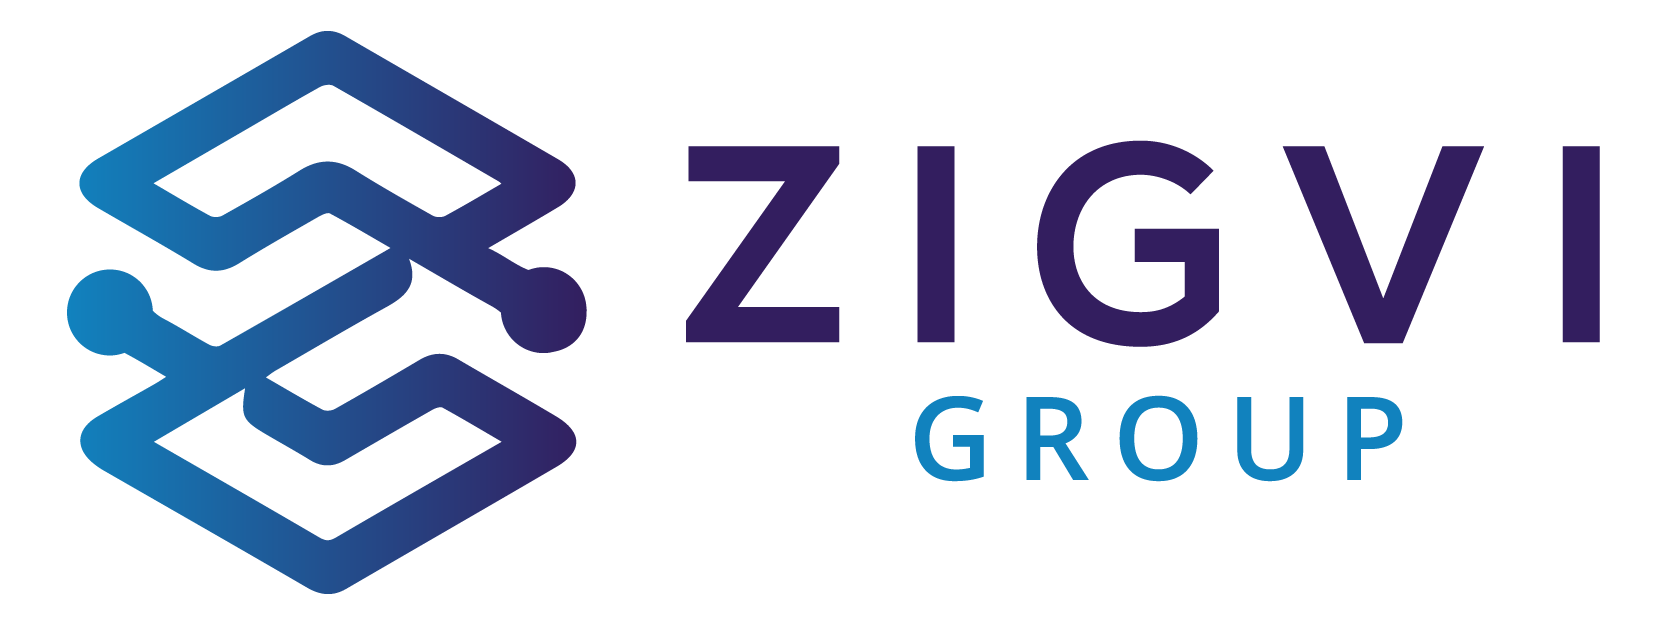 Zigvi: Your IT Consulting Partner 